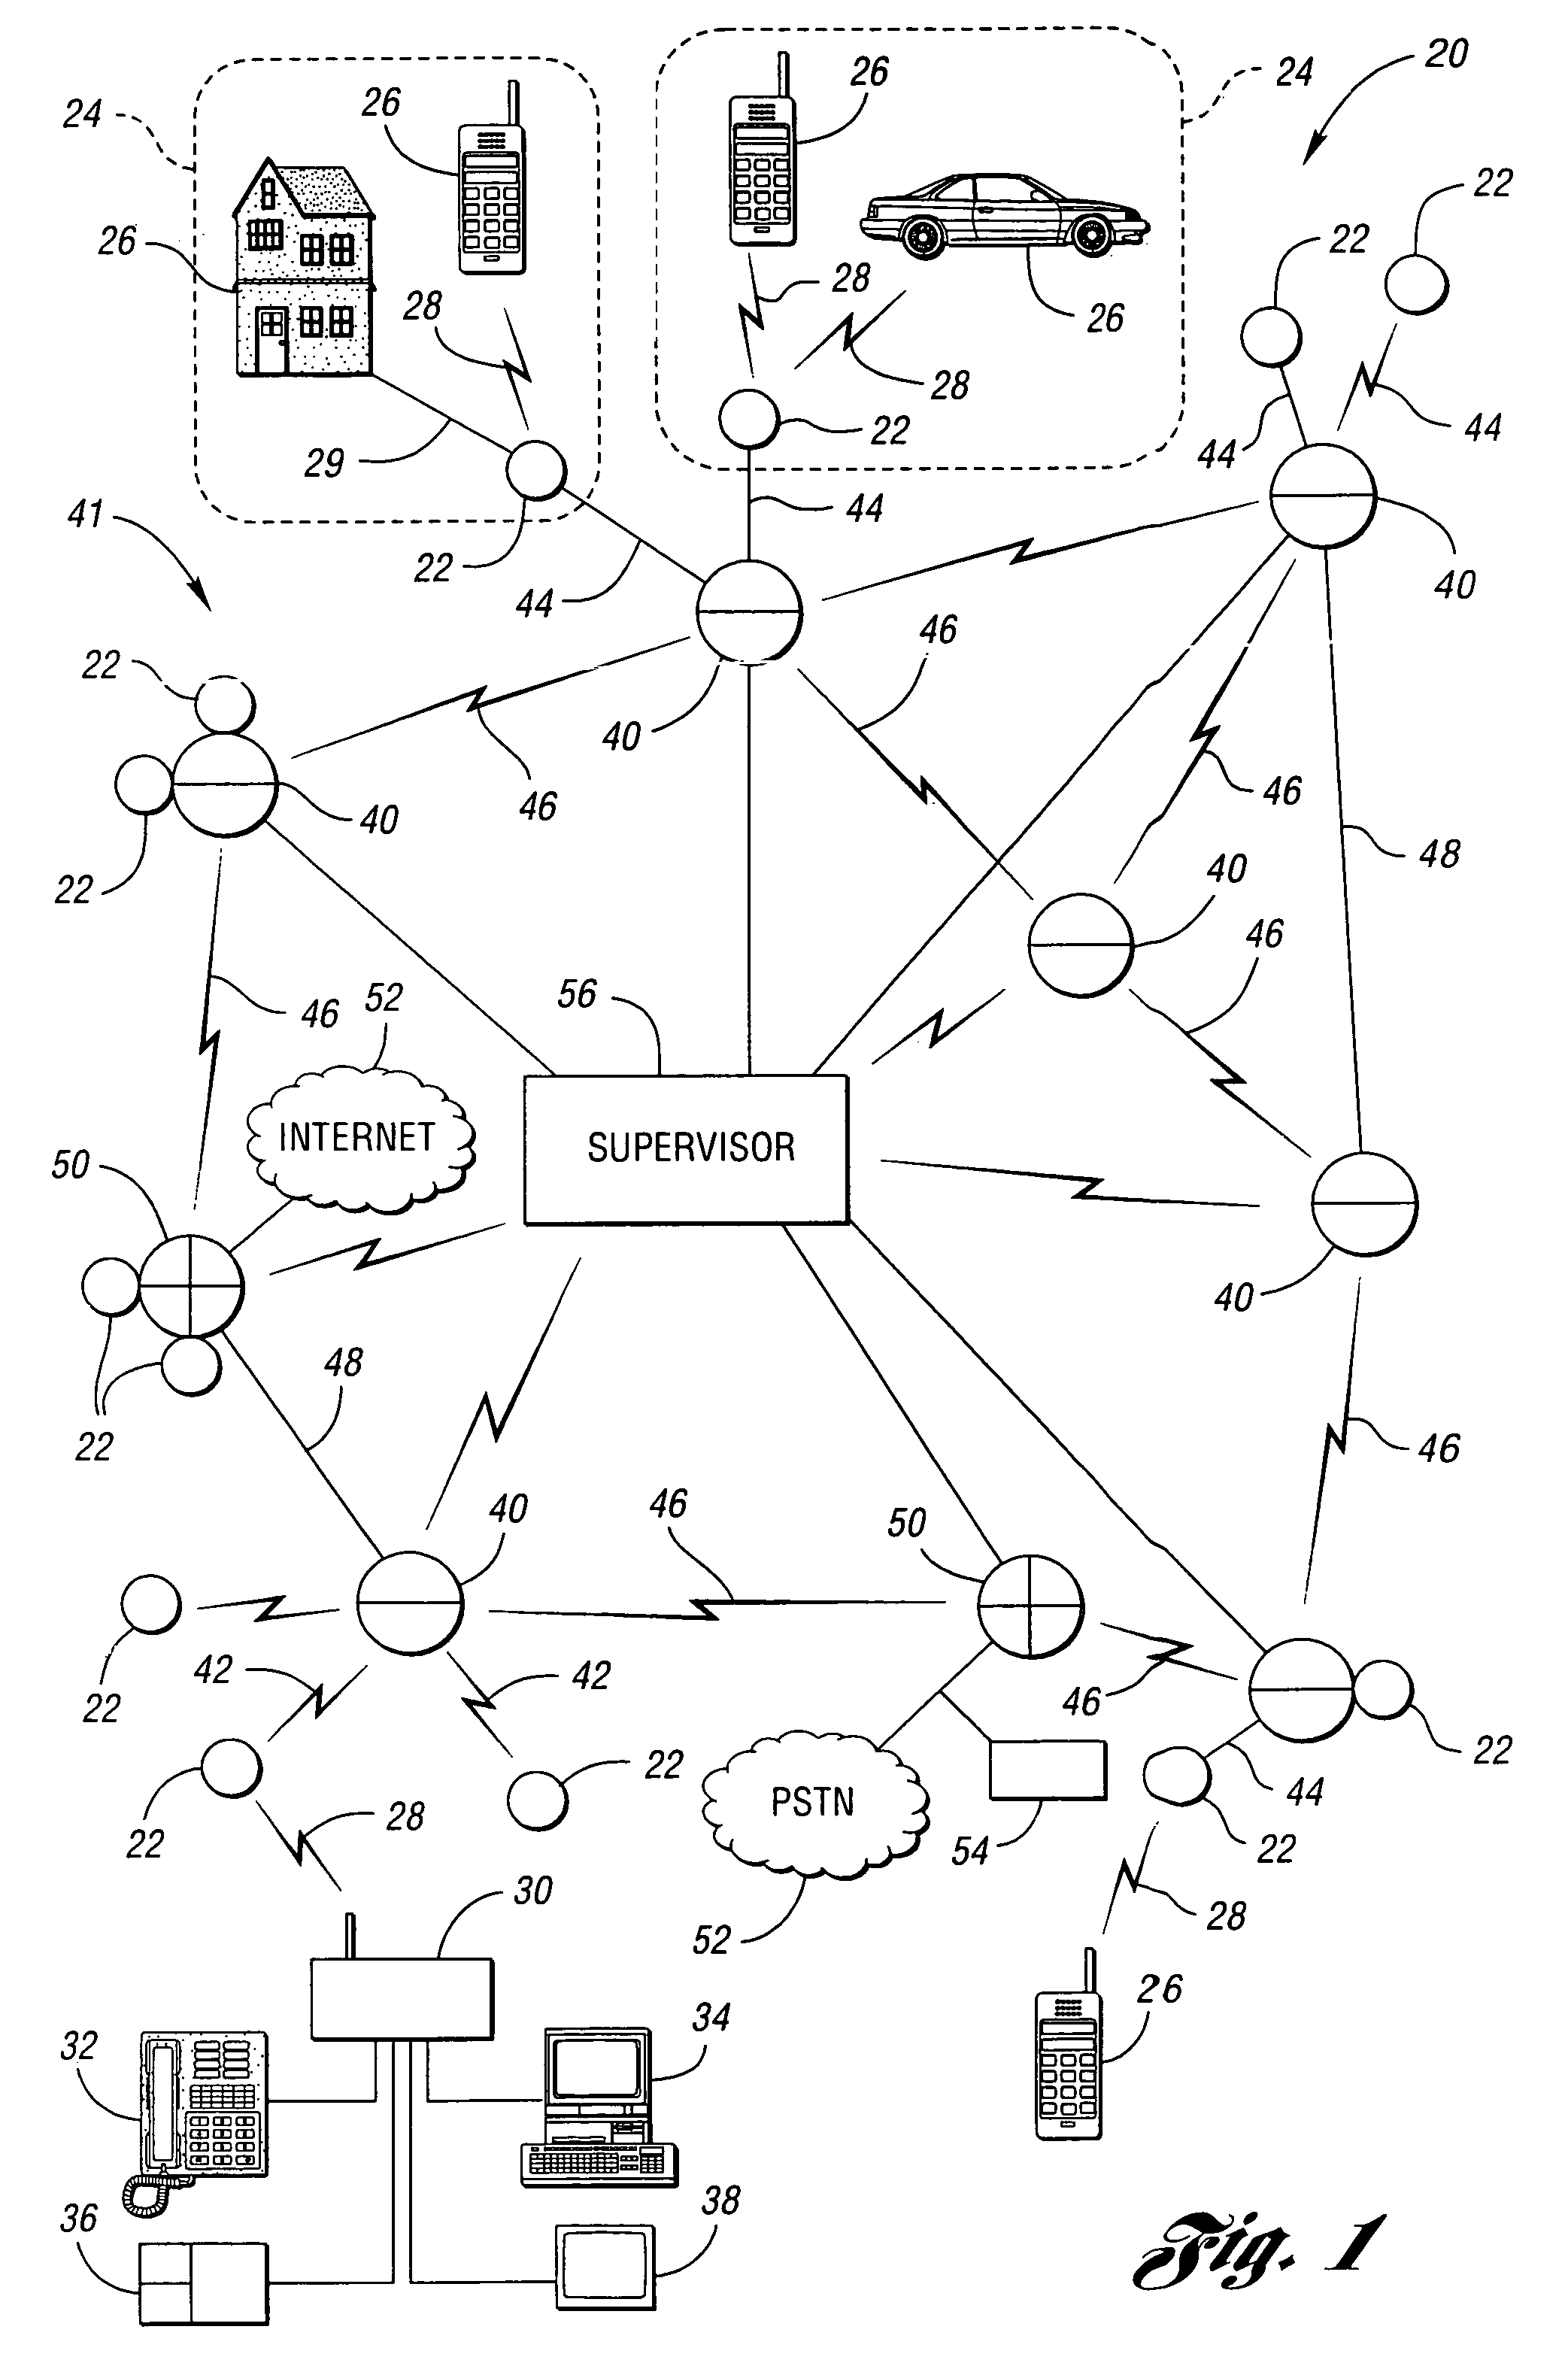 System and method for dynamic distributed communication